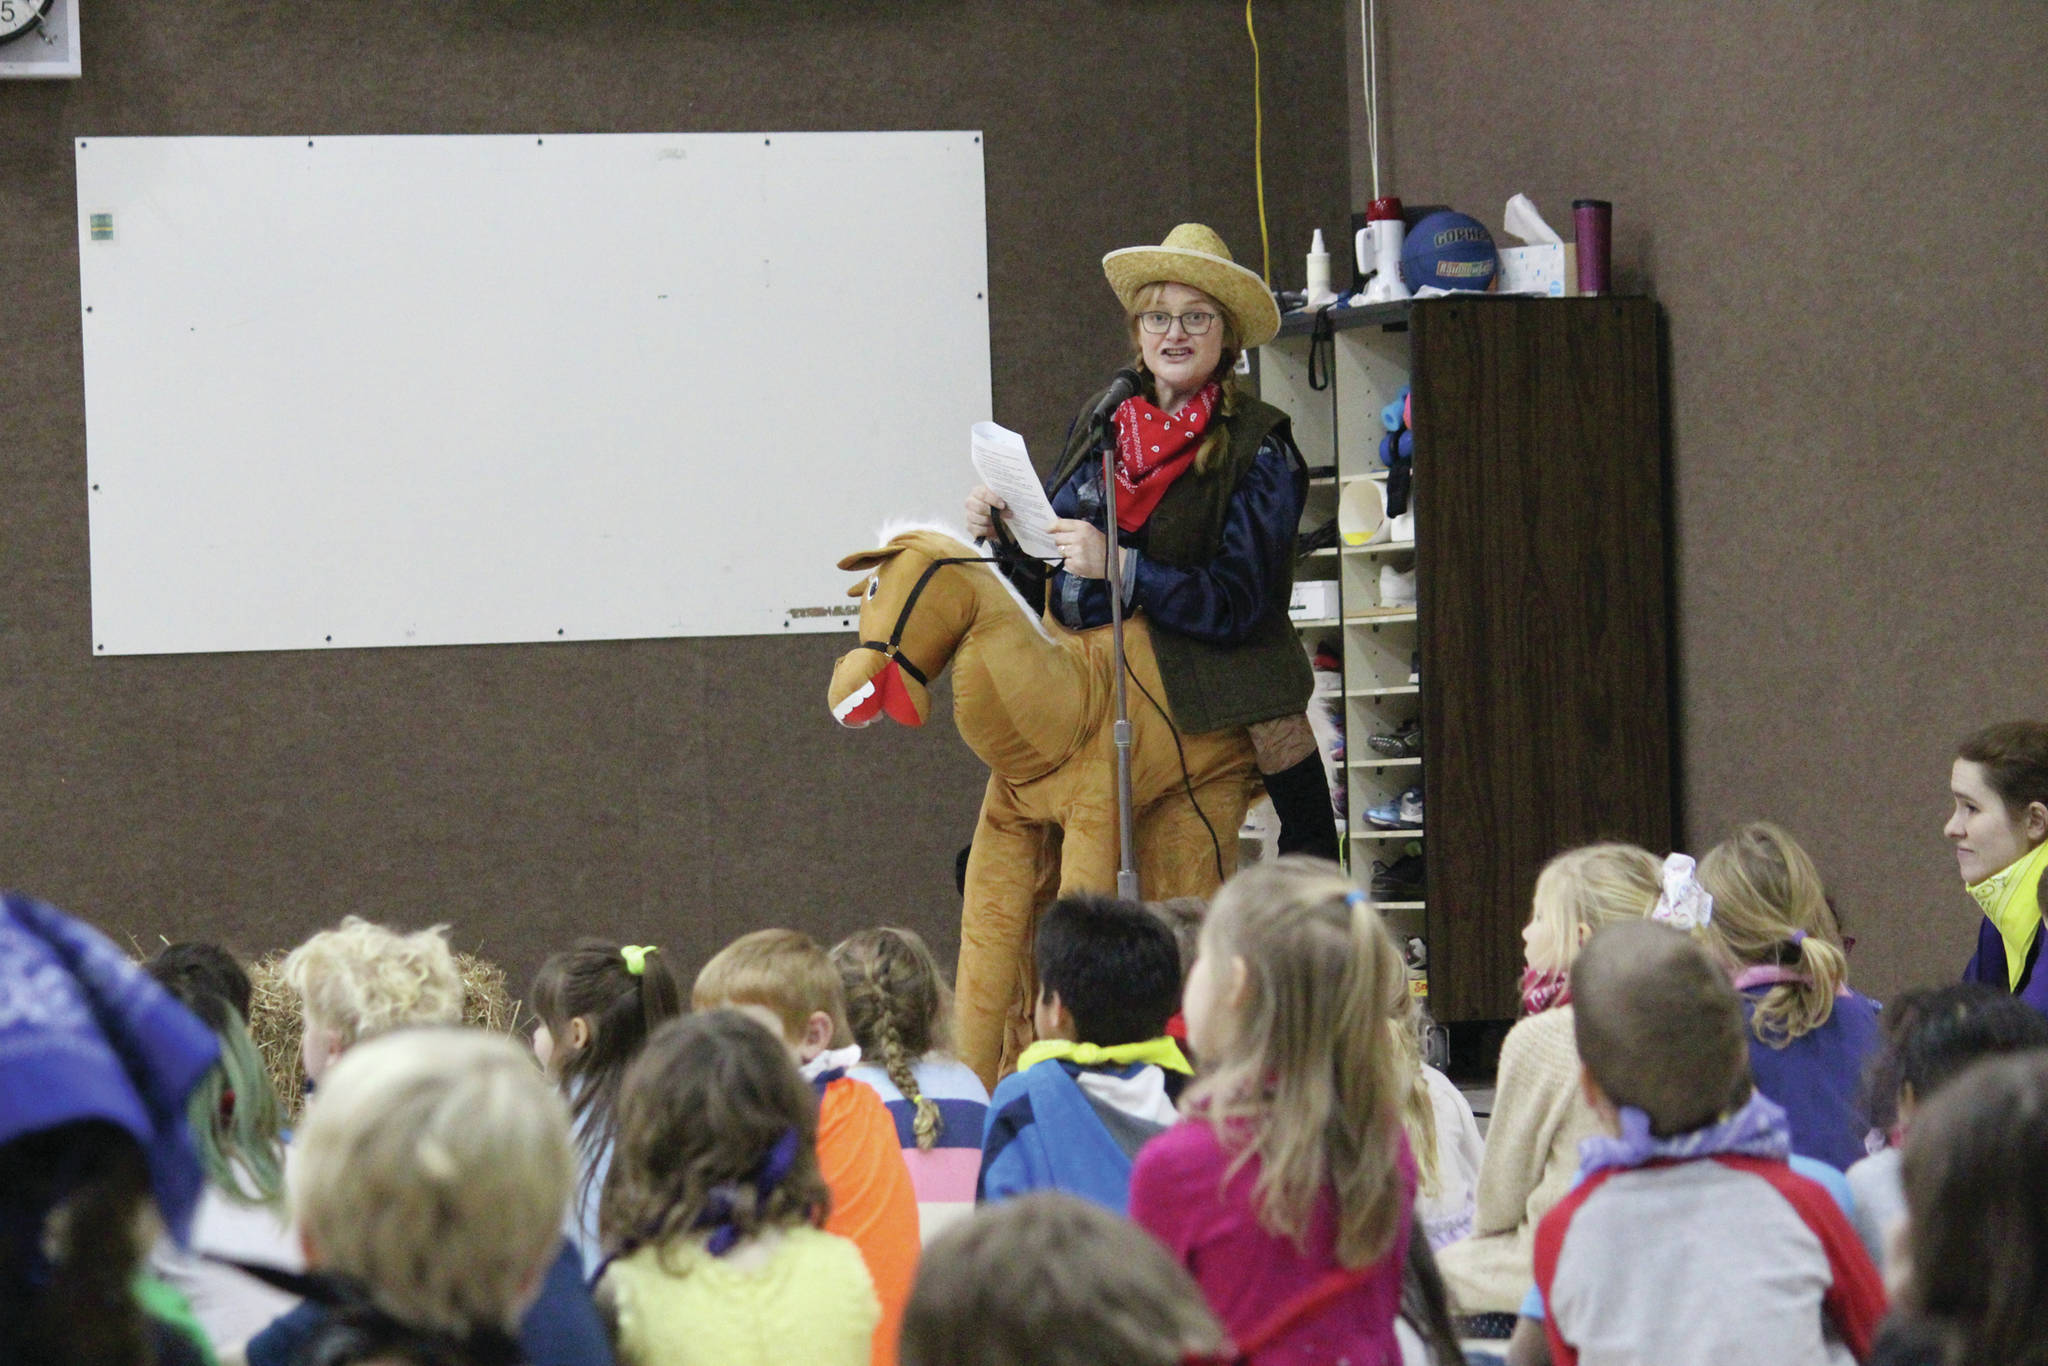 Mindy Hunter performs part of a staff skit for Paul Banks Elementary School students during an assembly to celebrate the start of the school’s annual read-a-thon Feb. 3, 2020 at the school in Homer, Alaska. (Photo by Megan Pacer/Homer News)